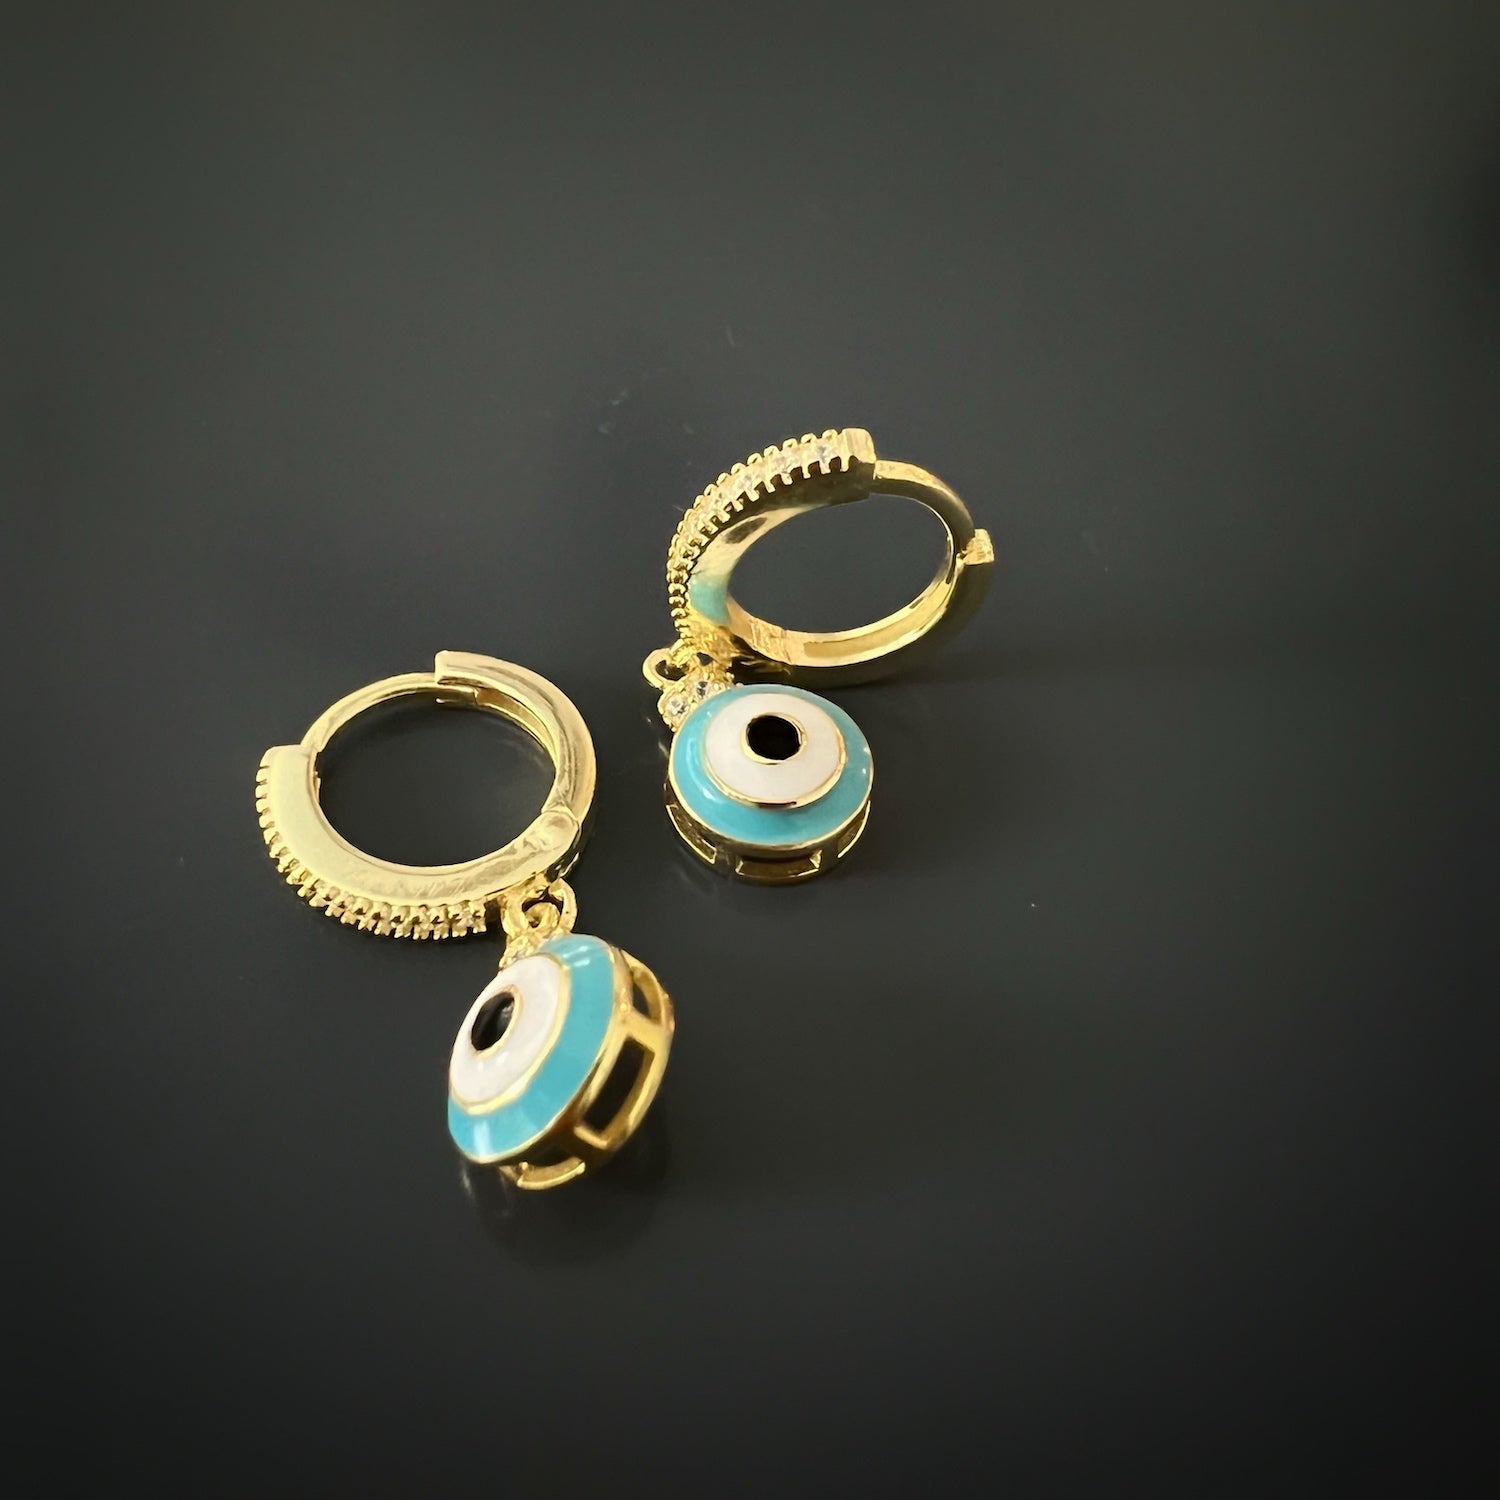 Handcrafted gold earrings featuring a beautiful turquoise evil eye design